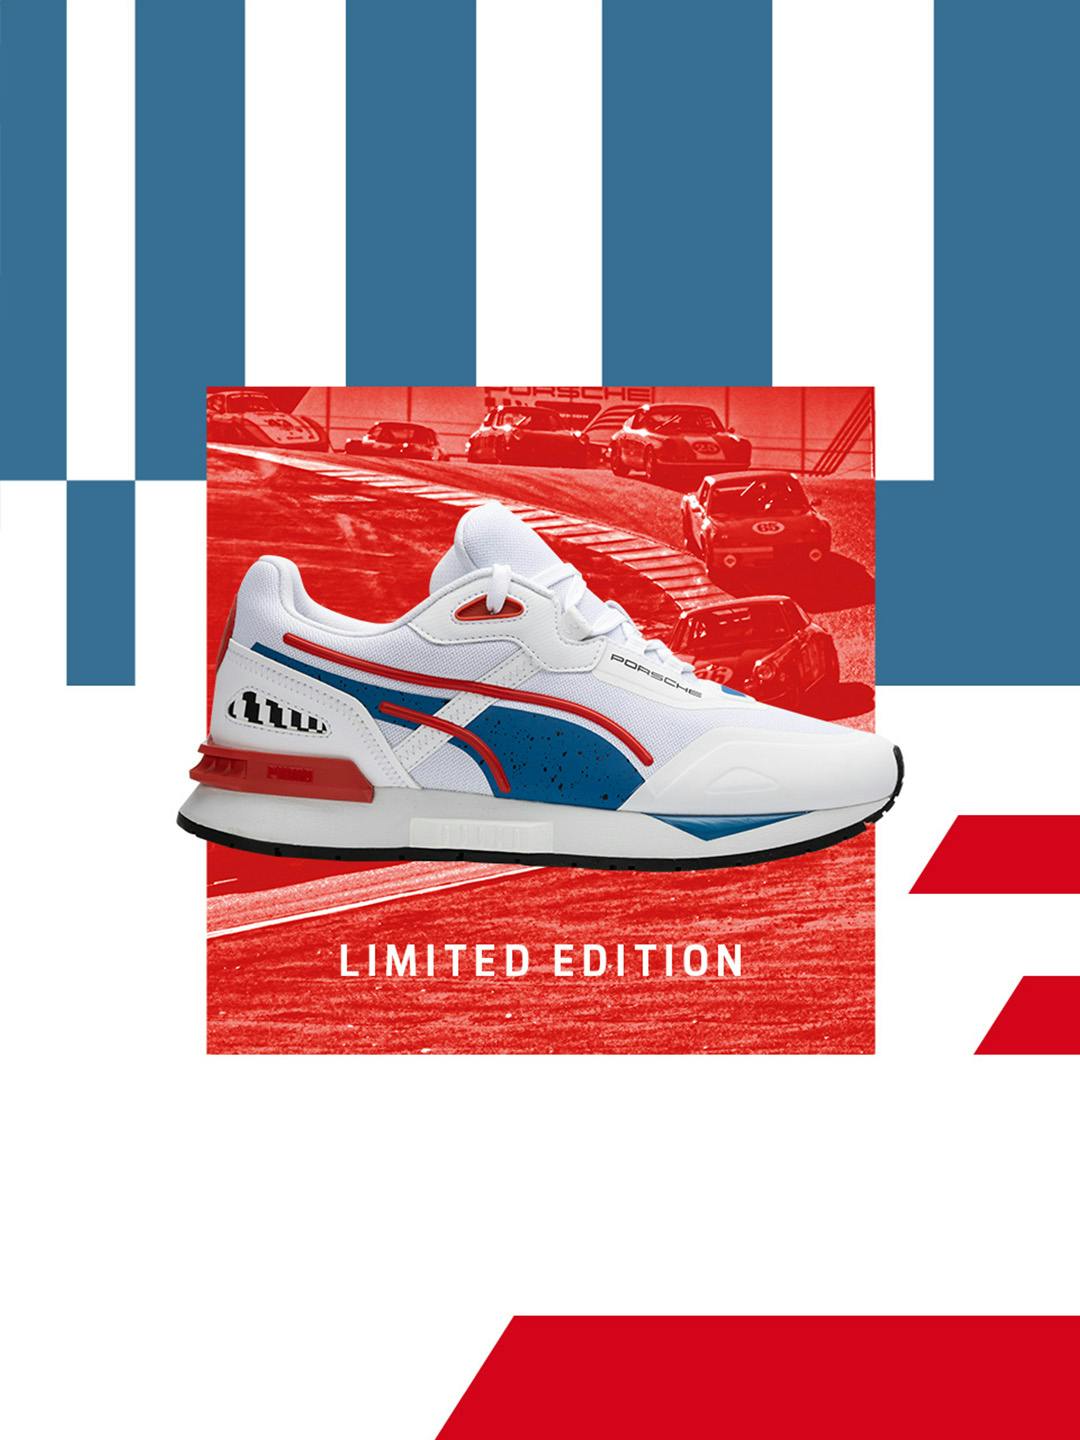 You can see a black sneaker with red and blue details with a white writing "Limited Edition". In the background is an old picture with a Porsche race track.